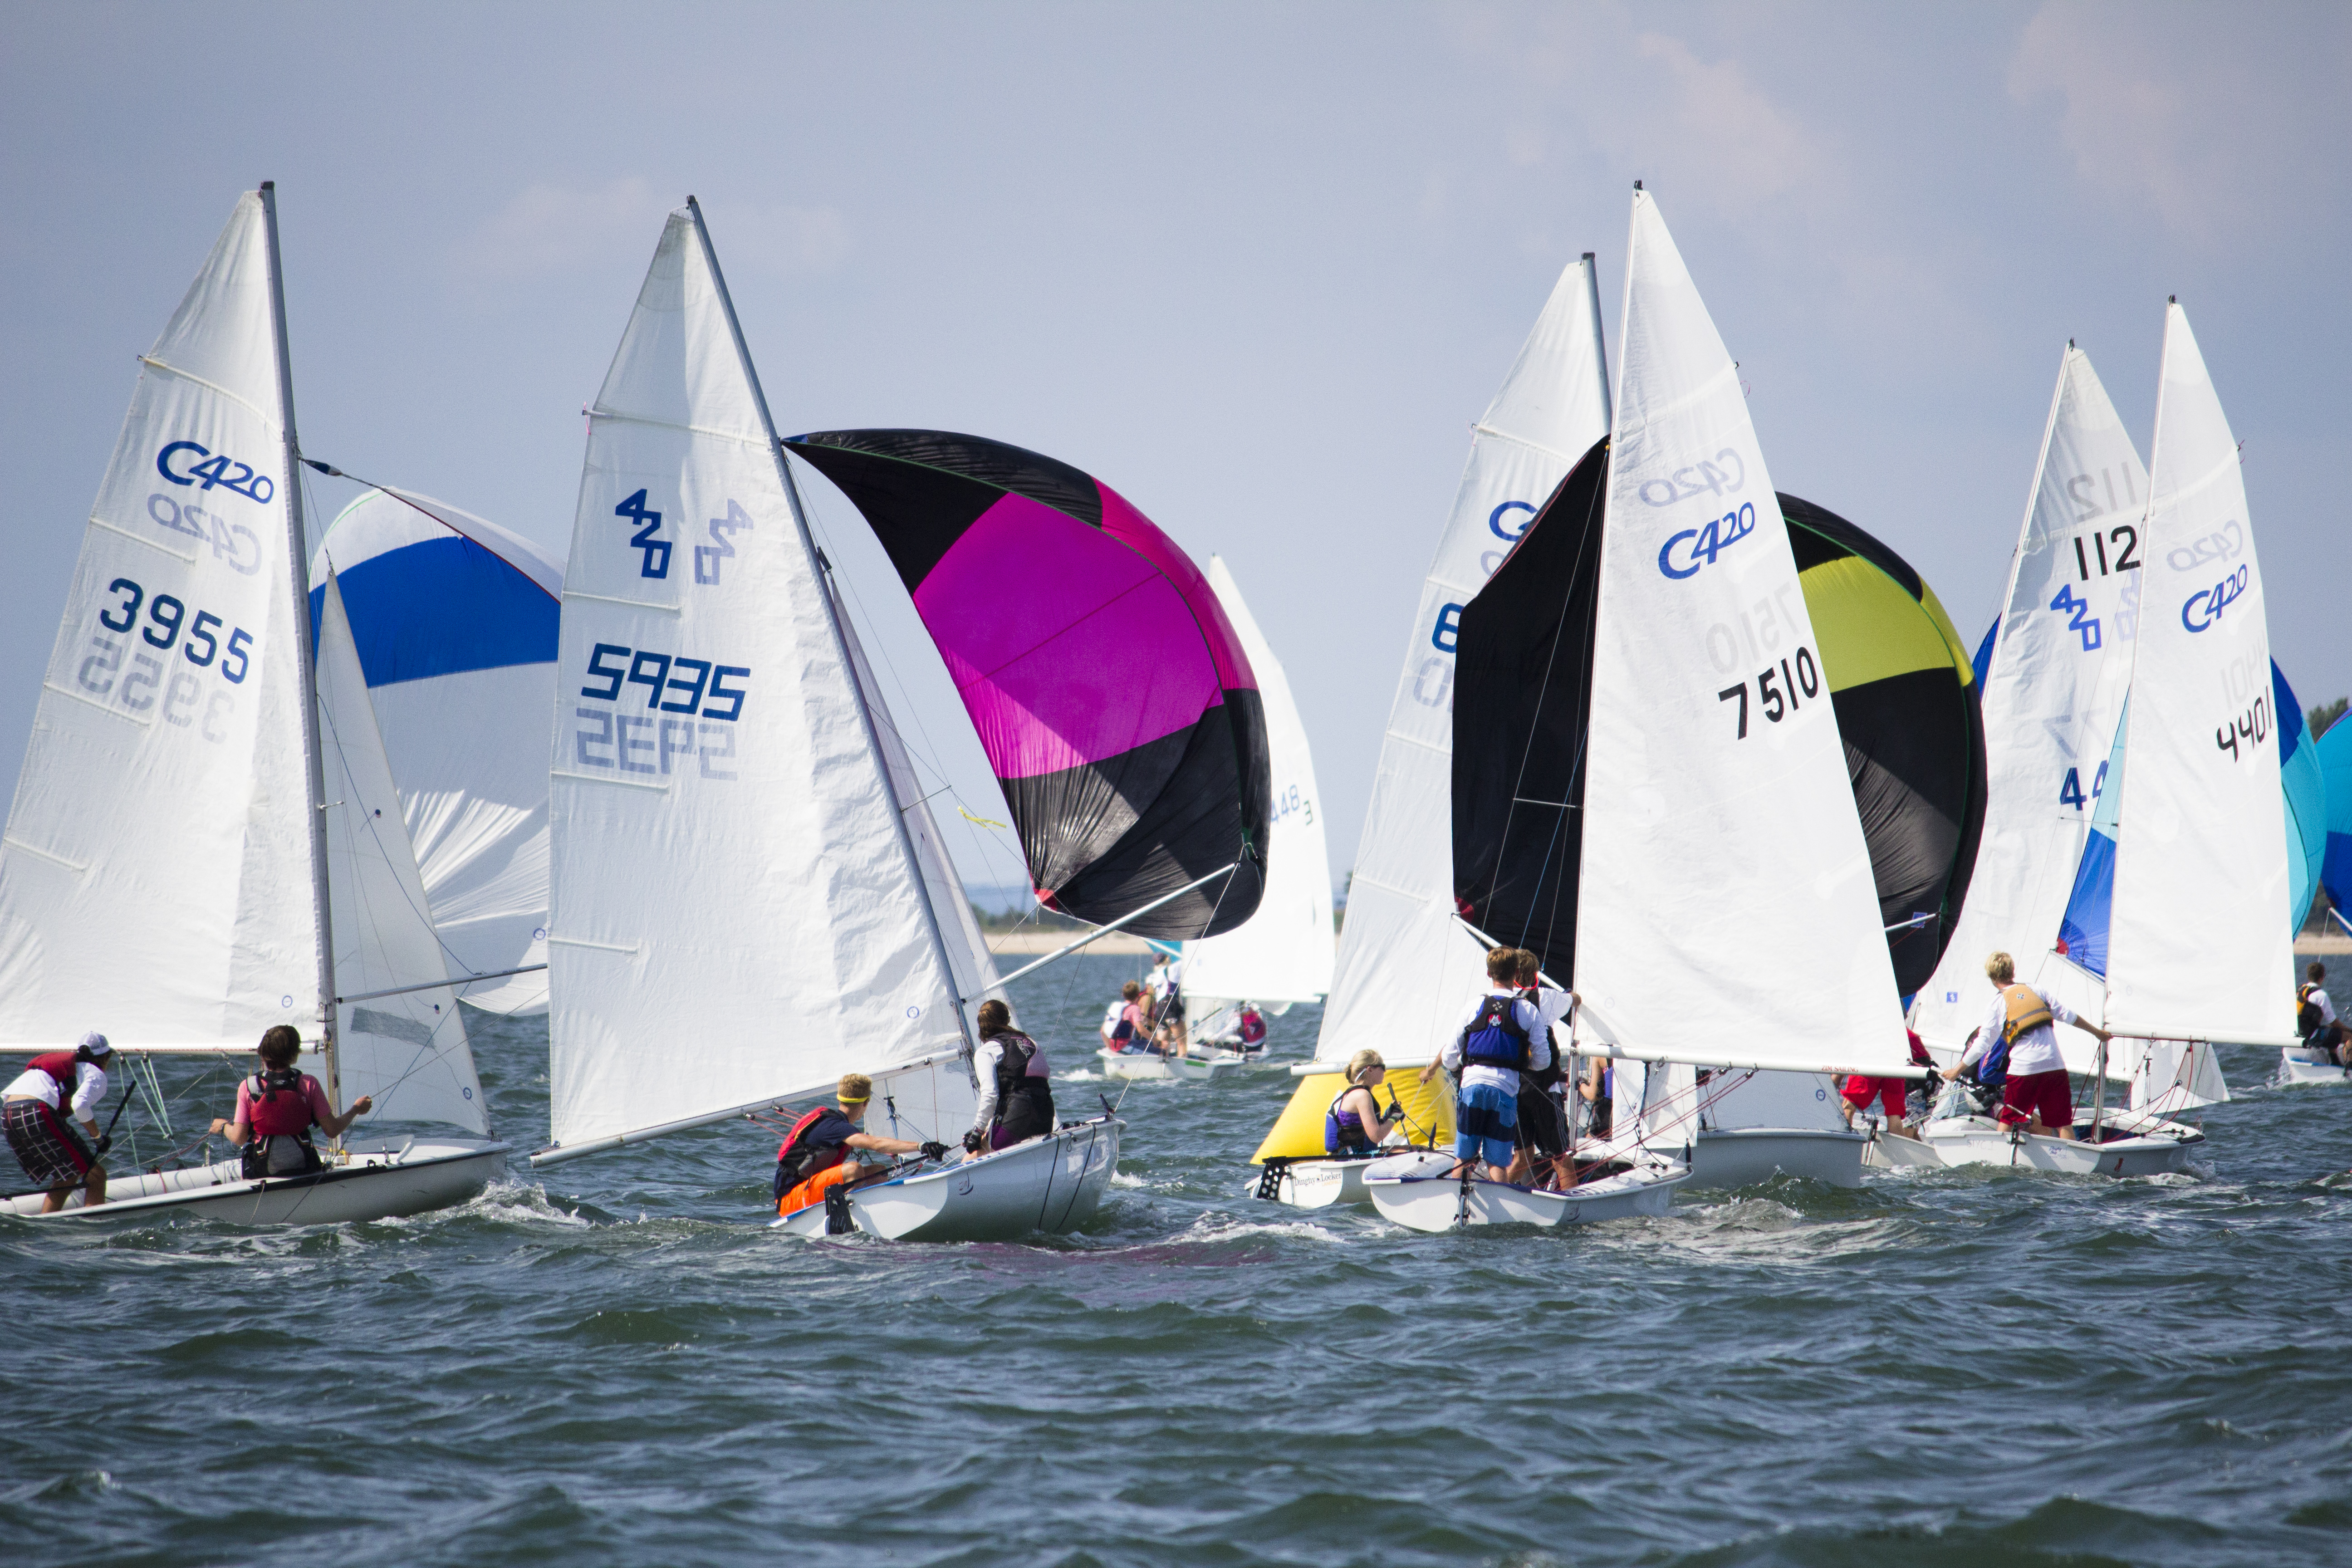 Big Winds and Fierce Competition Meet Sailors at JSA Laser C420 ...